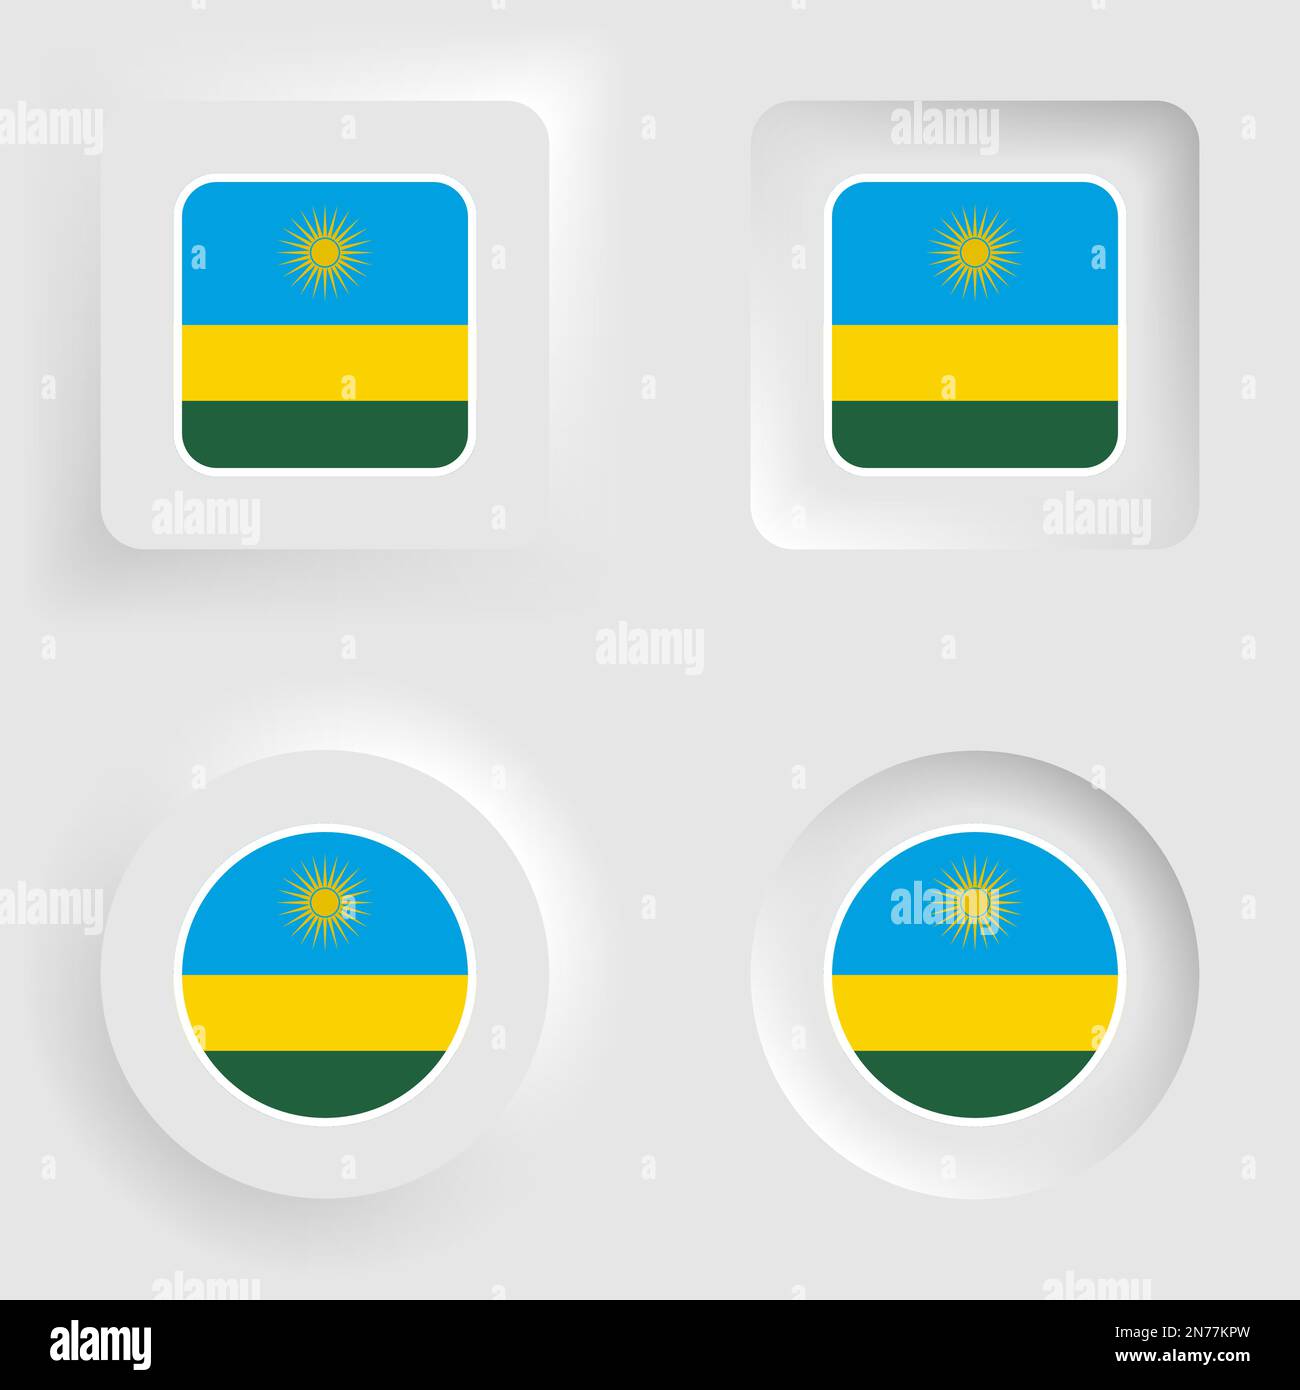 Rwanda neumorphic graphic and label set. Element of impact for the use you want to make of it. Stock Vector